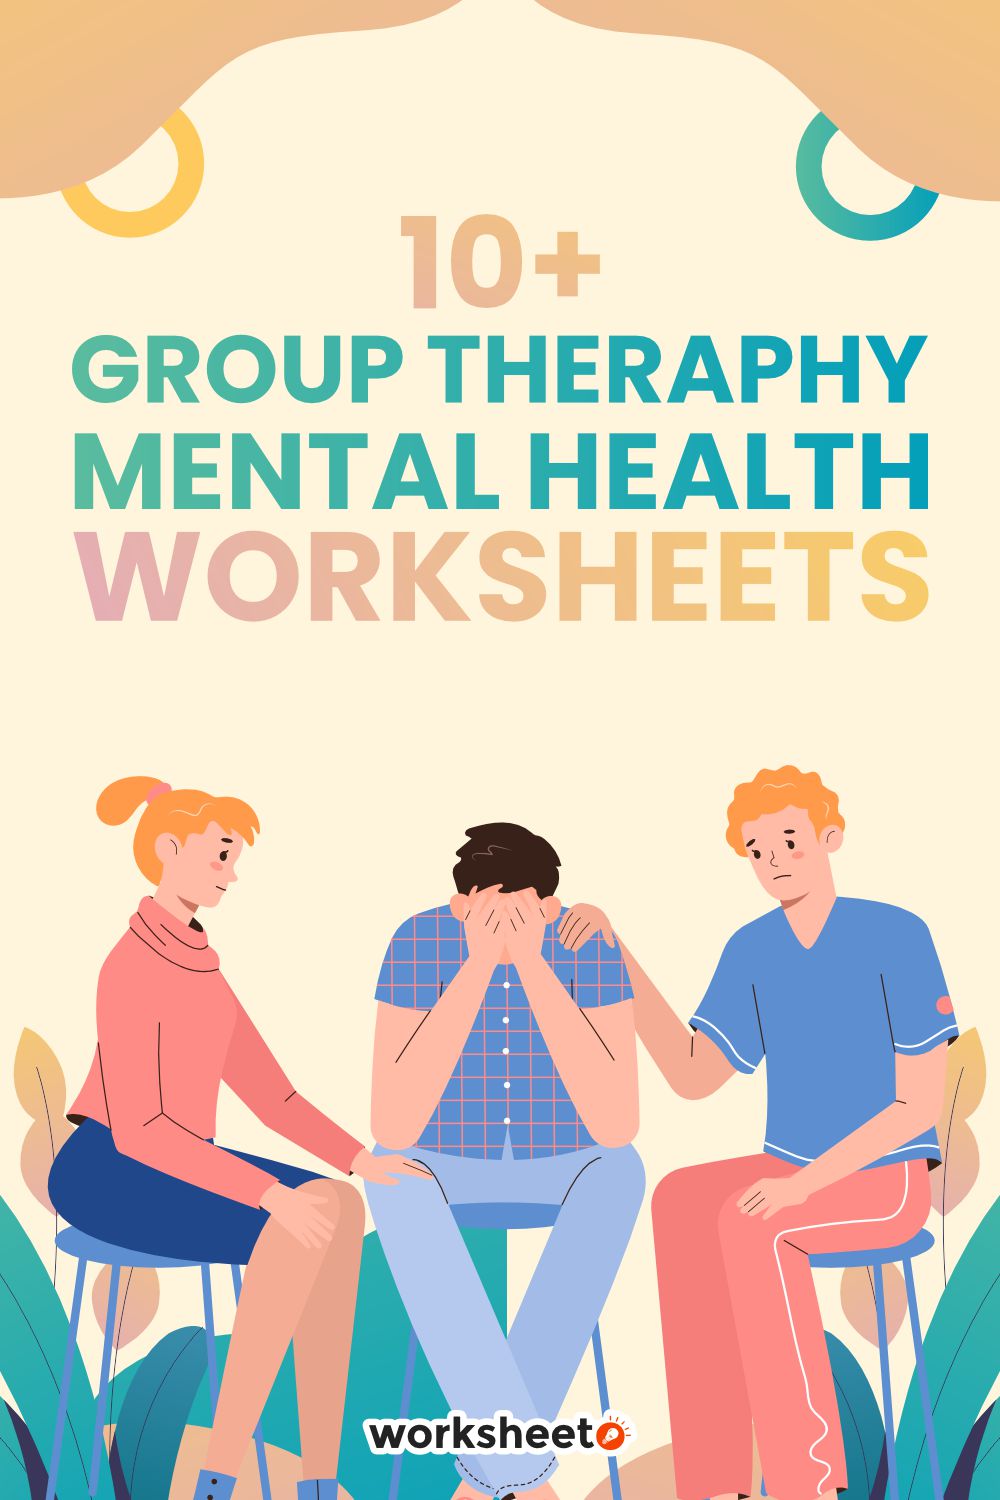 Group Therapy Mental Health Worksheets